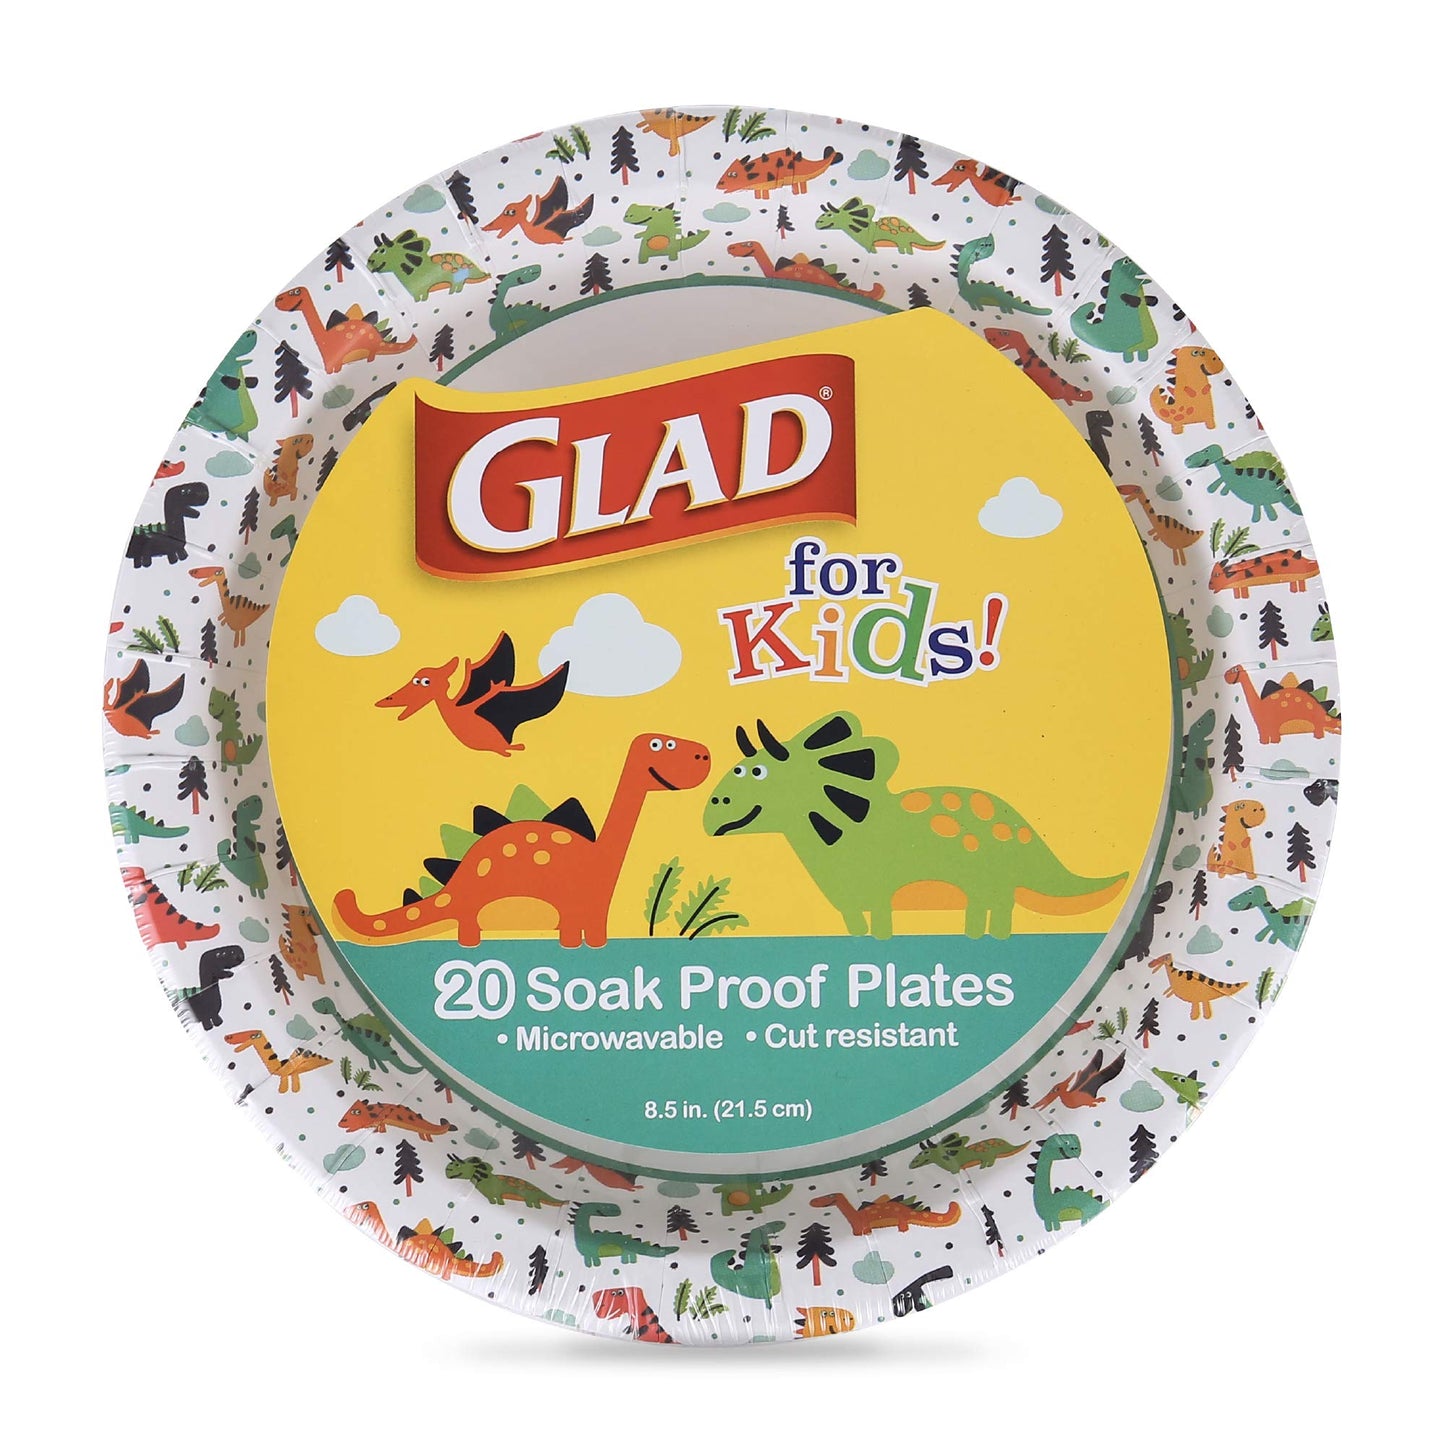 Glad for Kids Dinosaur-Themed Heavy Duty Disposable Paper Plates - Soak Proof, Microwavable, 8.5" Round Plates, Perfect for Birthday Parties and Dinosaurs Lovers - Pack of 20 Party Plates